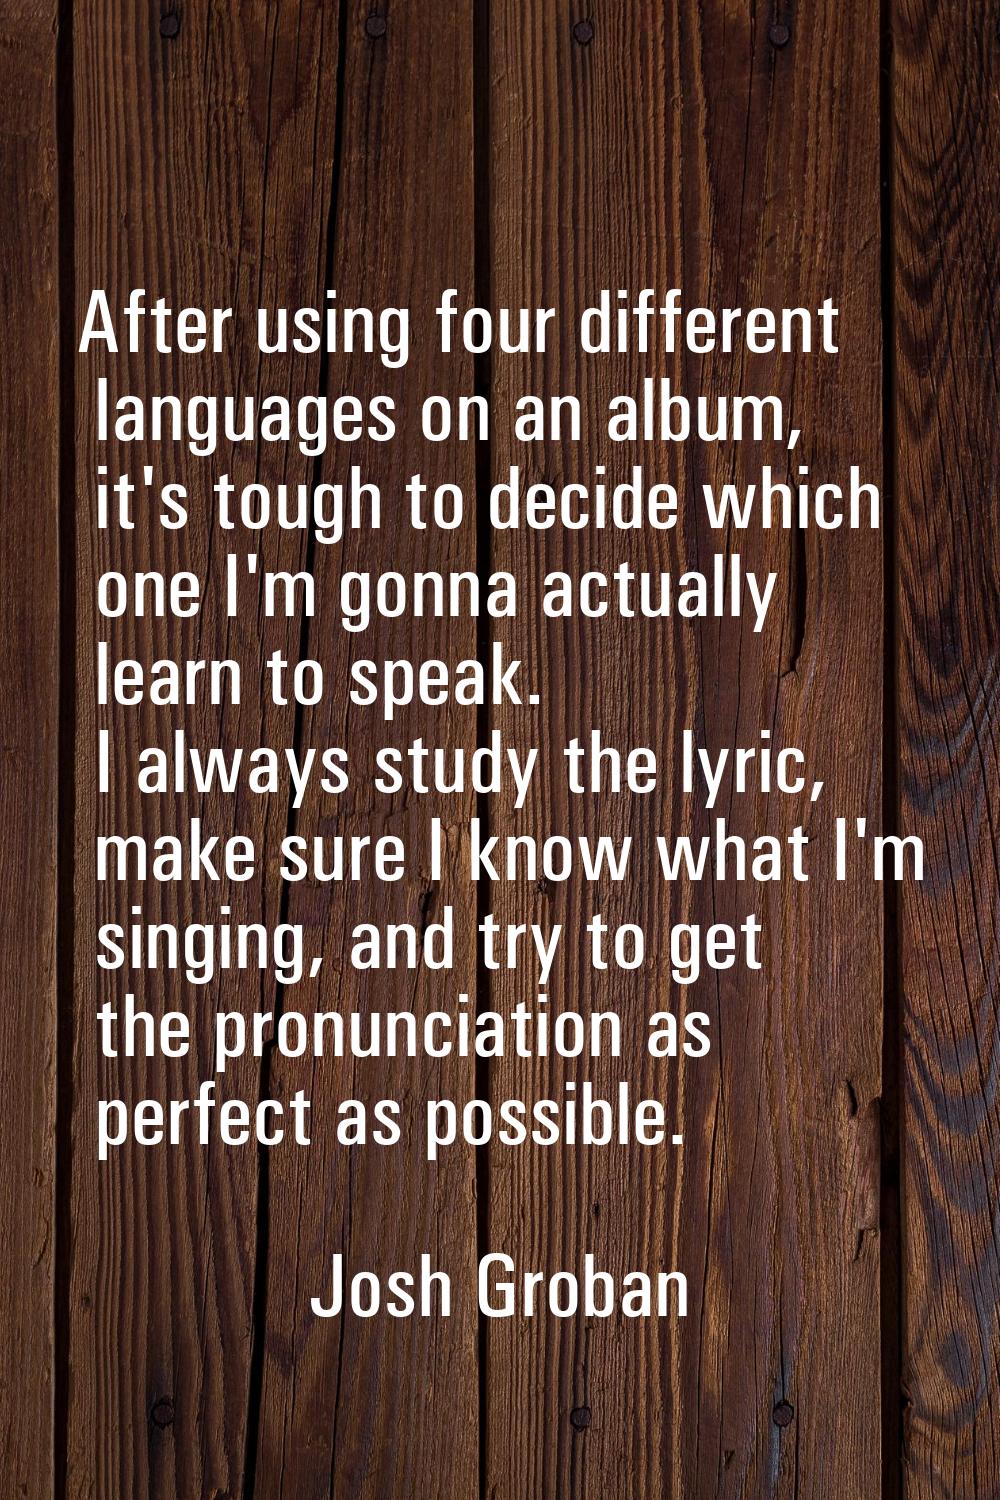 After using four different languages on an album, it's tough to decide which one I'm gonna actually